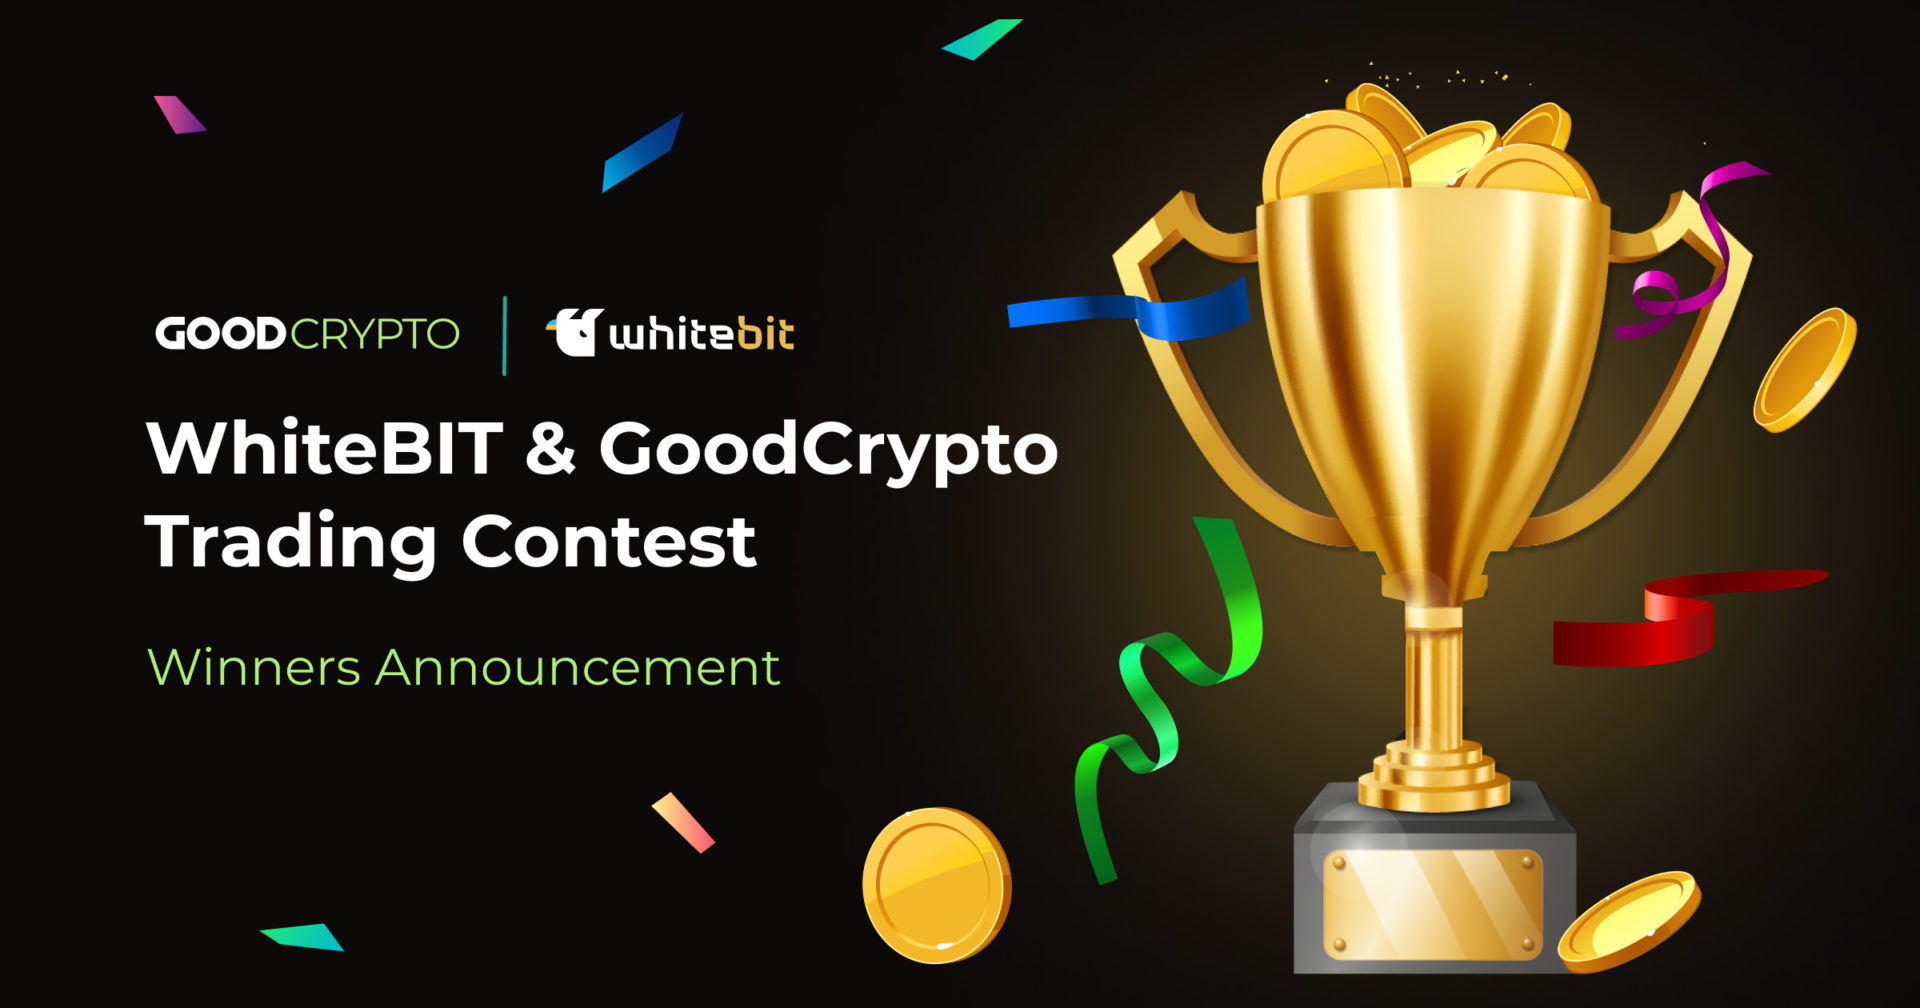 winners announcement of the WhiteBIT and GoodCrypto trading contest